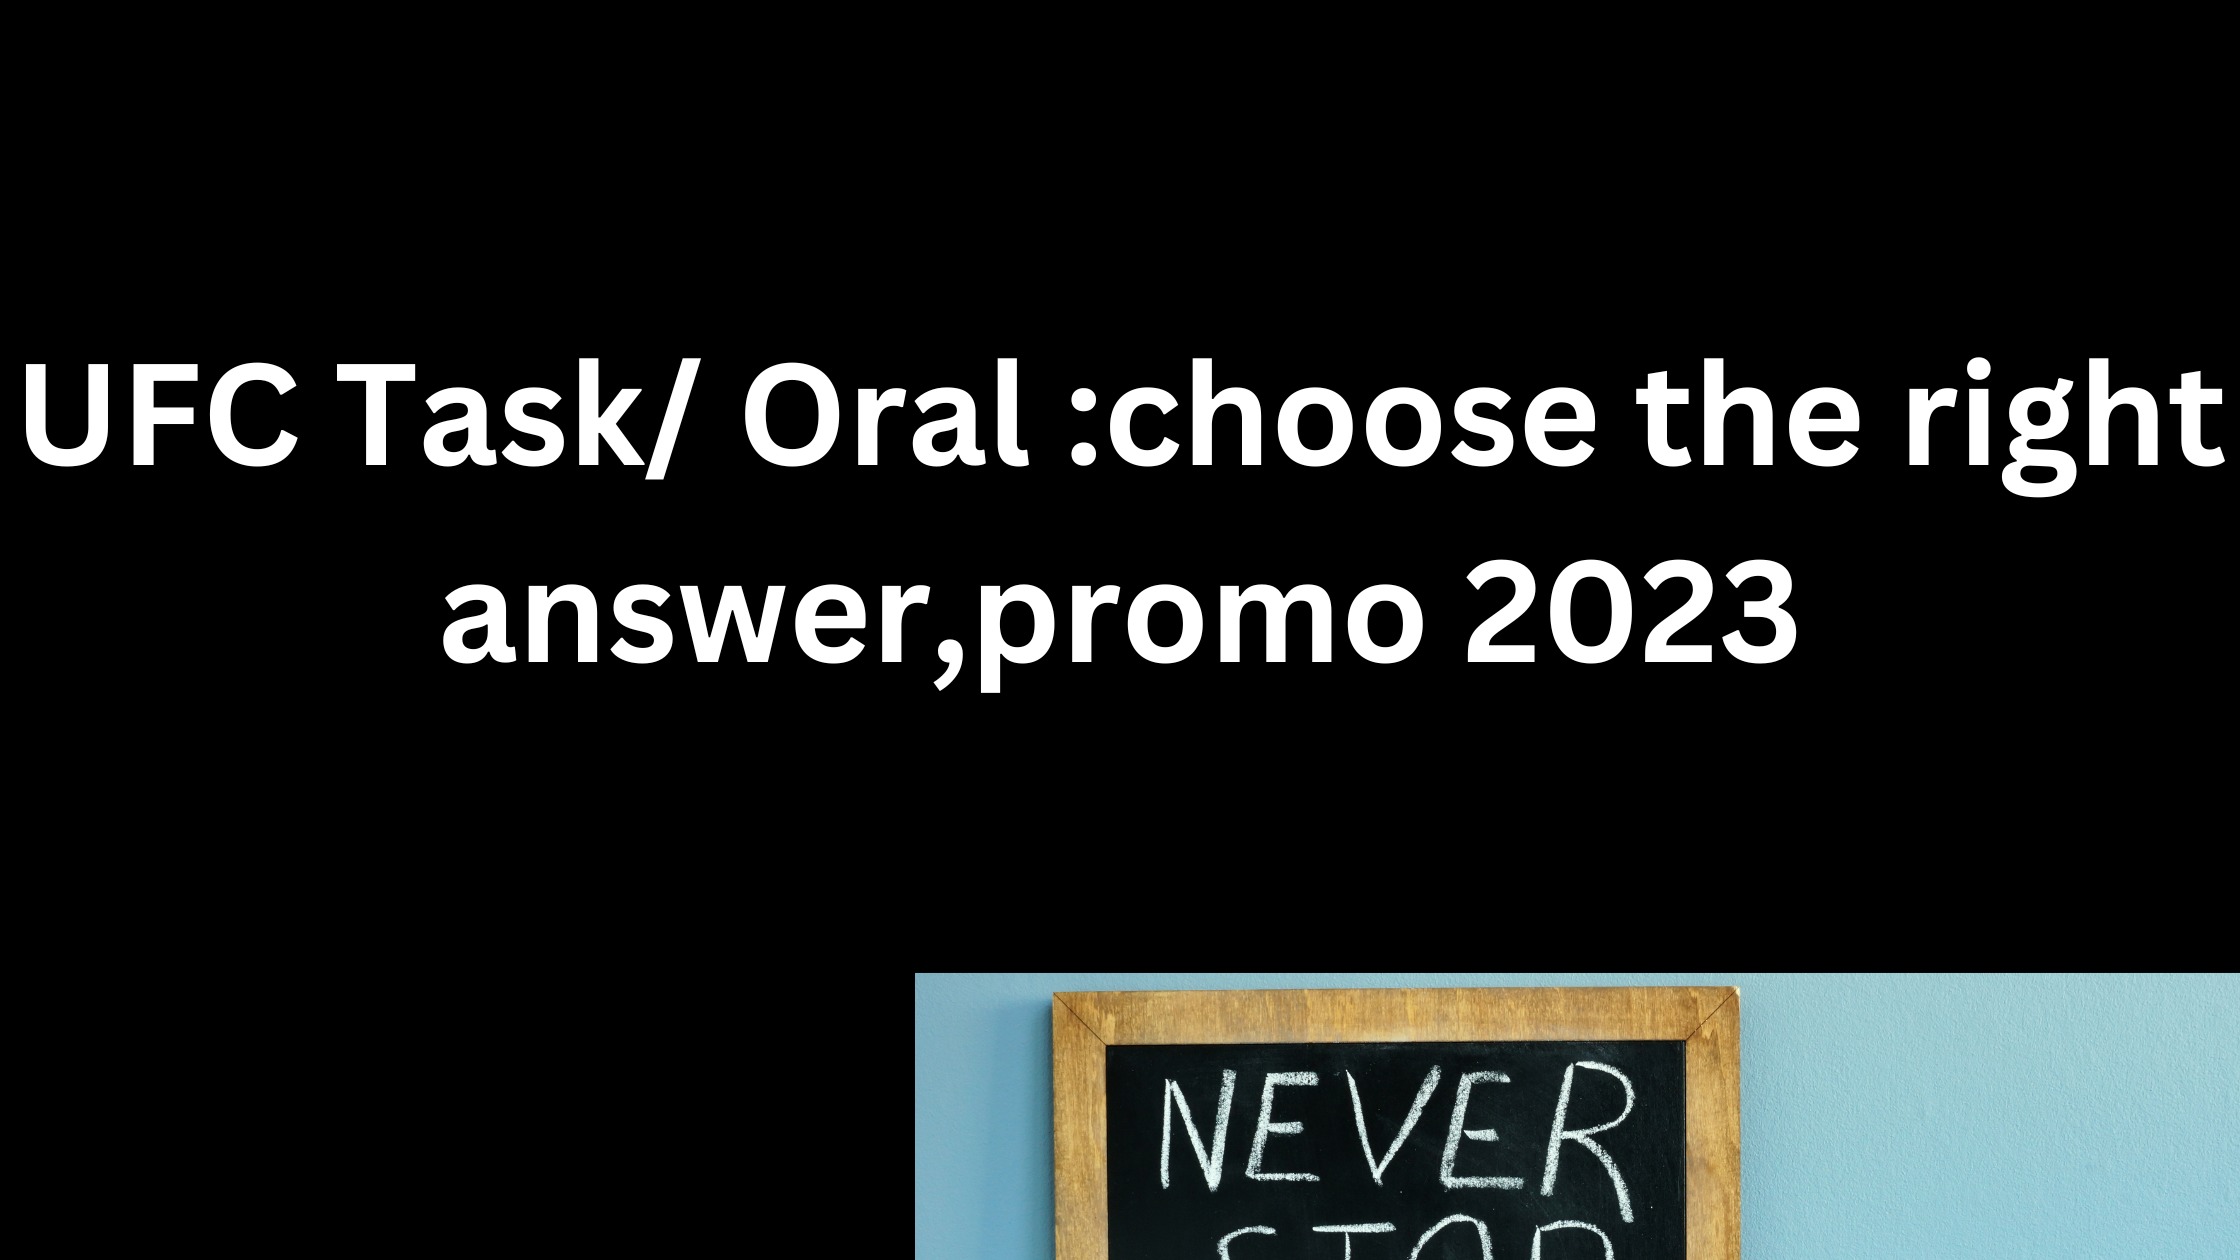 UFC Task/ Oral: choosee the right answer, promo 2023